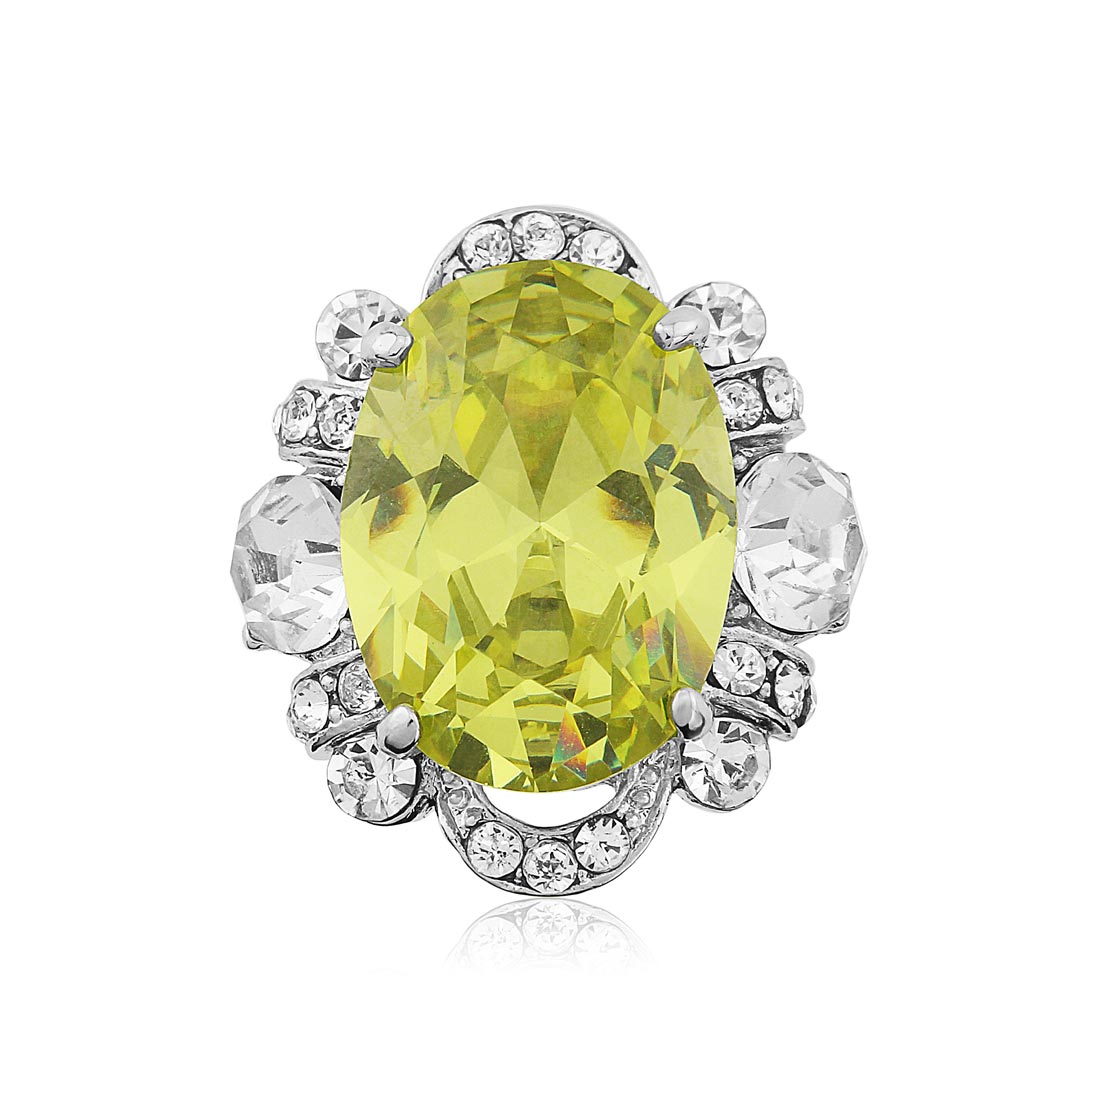 Heiress Rocks Yellow Cubic Zirconia Cocktail Ring